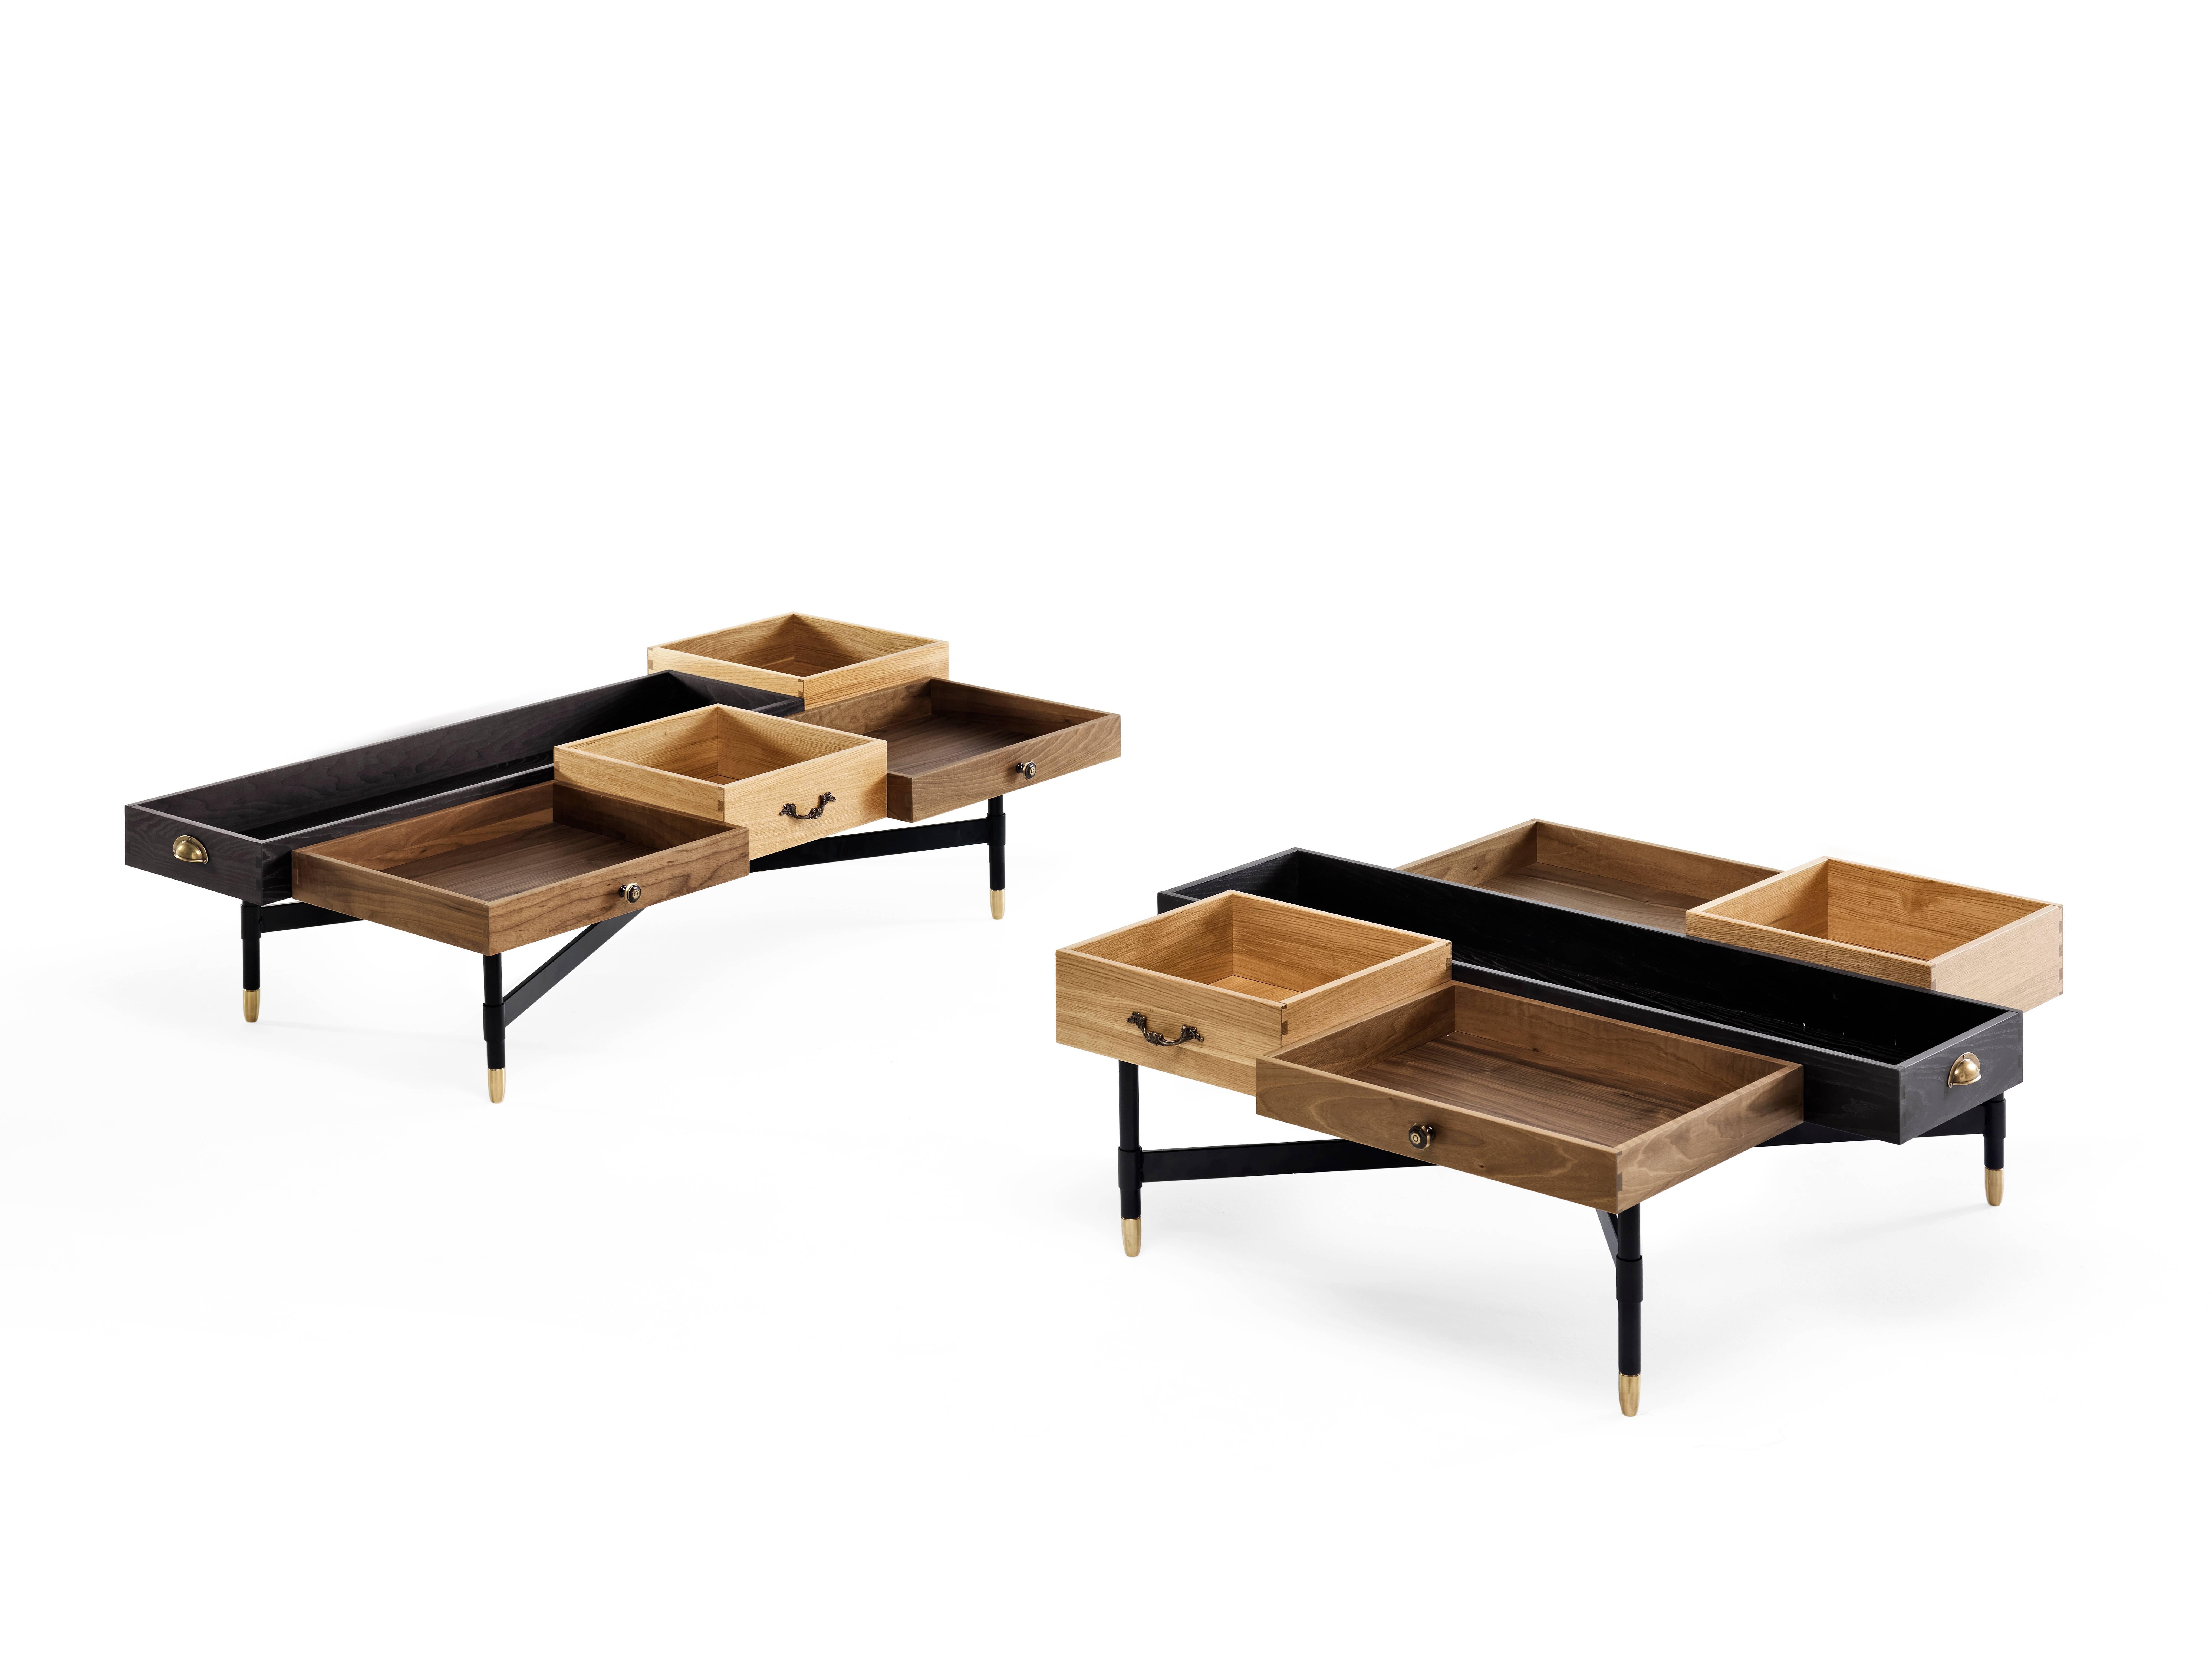 The Dreamers is a coffee table designed by Uto Balmoral for Mogg, made in solid walnut, ash and oak. The Dreamers are a pair of coffee tables composed of drawers, the idea of the creation of these coffee tables is based on the 'to highlight that